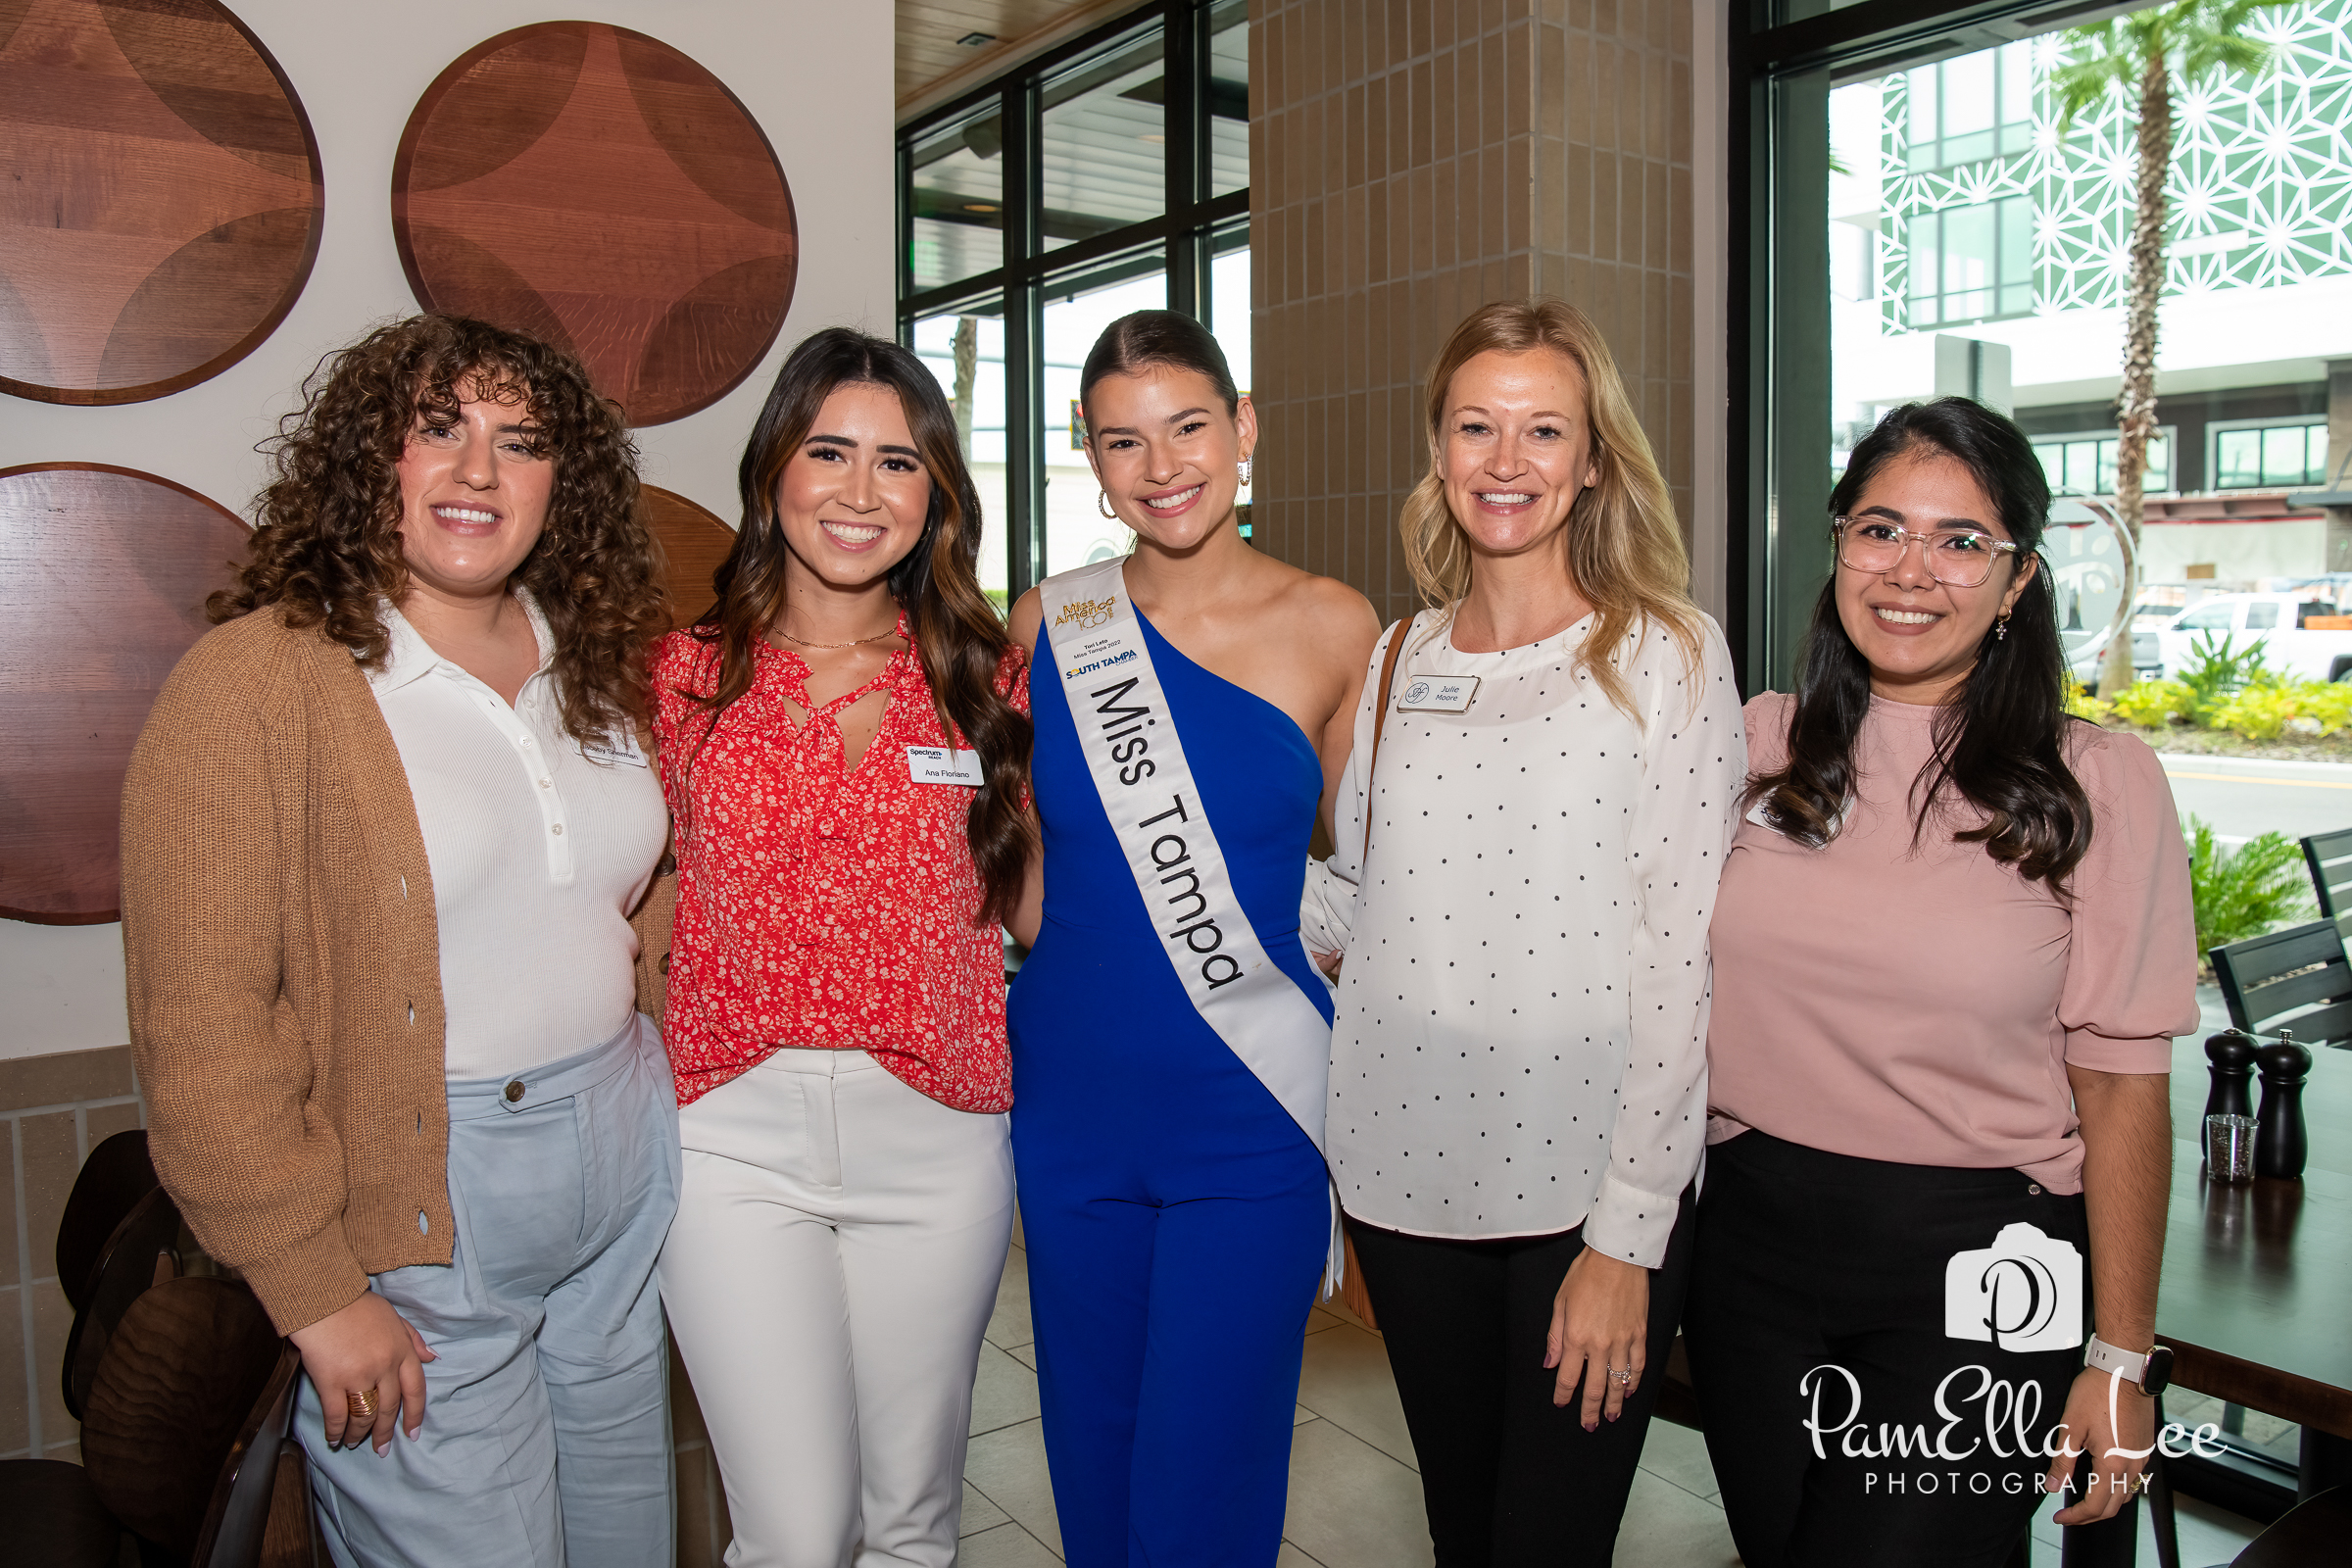 Event Follow Up: STCOC Women's Connection with Miss Tampa